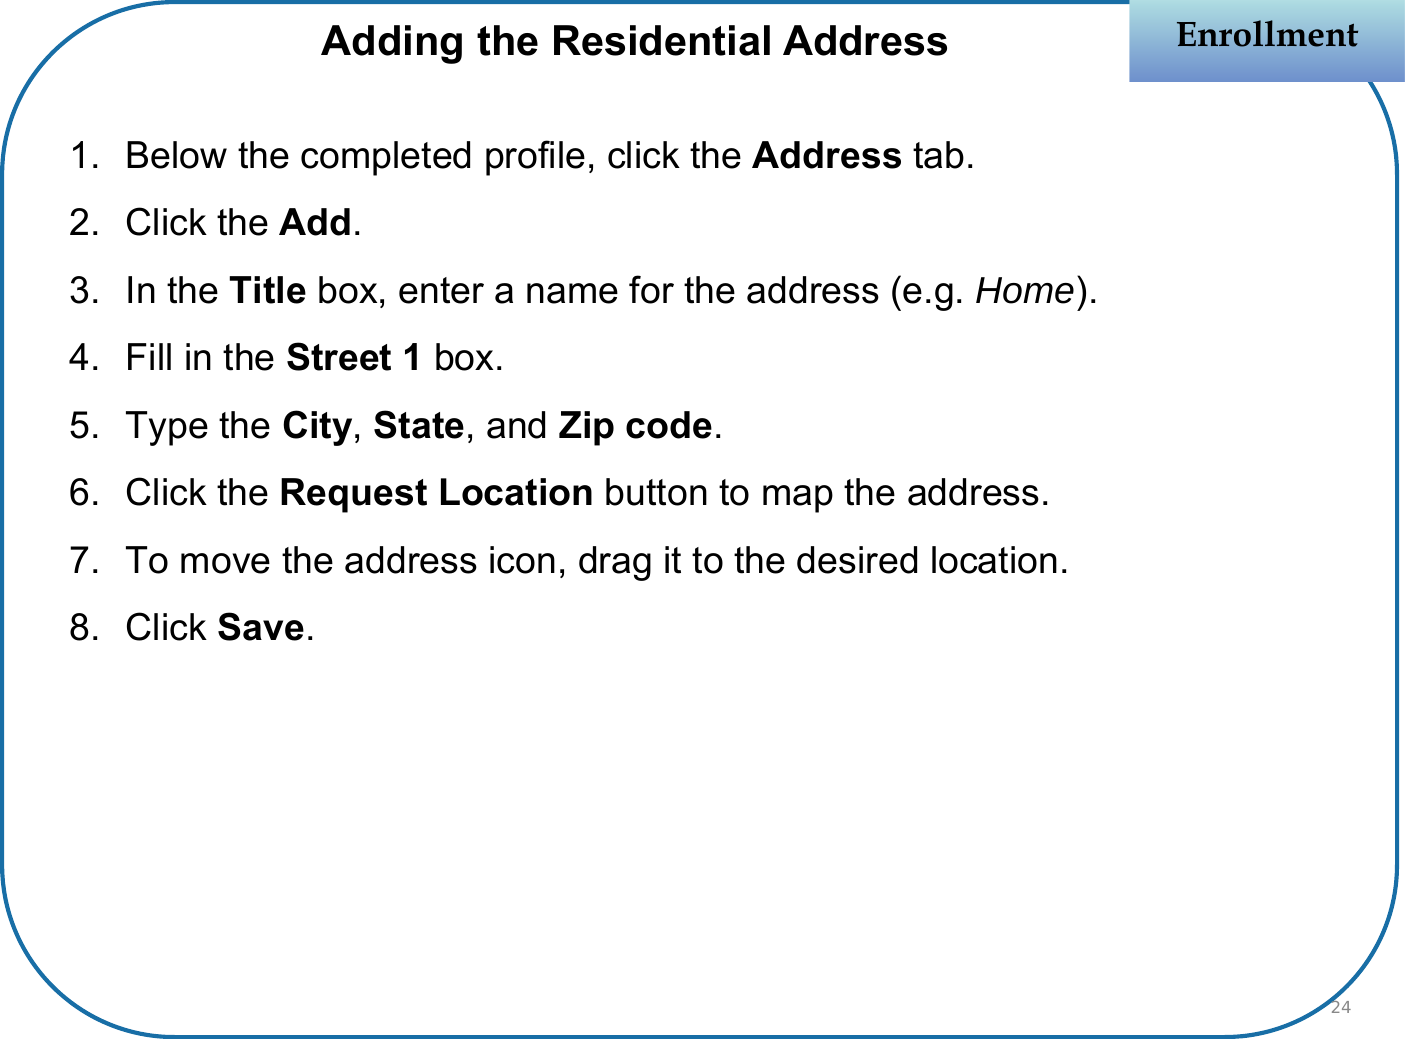 1. Below the completed profile, click the Address tab.2. Click the Add.3. In the Title box, enter a name for the address (e.g. Home).4. Fill in the Street 1 box.5. Type the City, State, and Zip code.6. Click the Request Location button to map the address.7. To move the address icon, drag it to the desired location.8. Click Save.EnrollmentEnrollmentAdding the Residential Address24